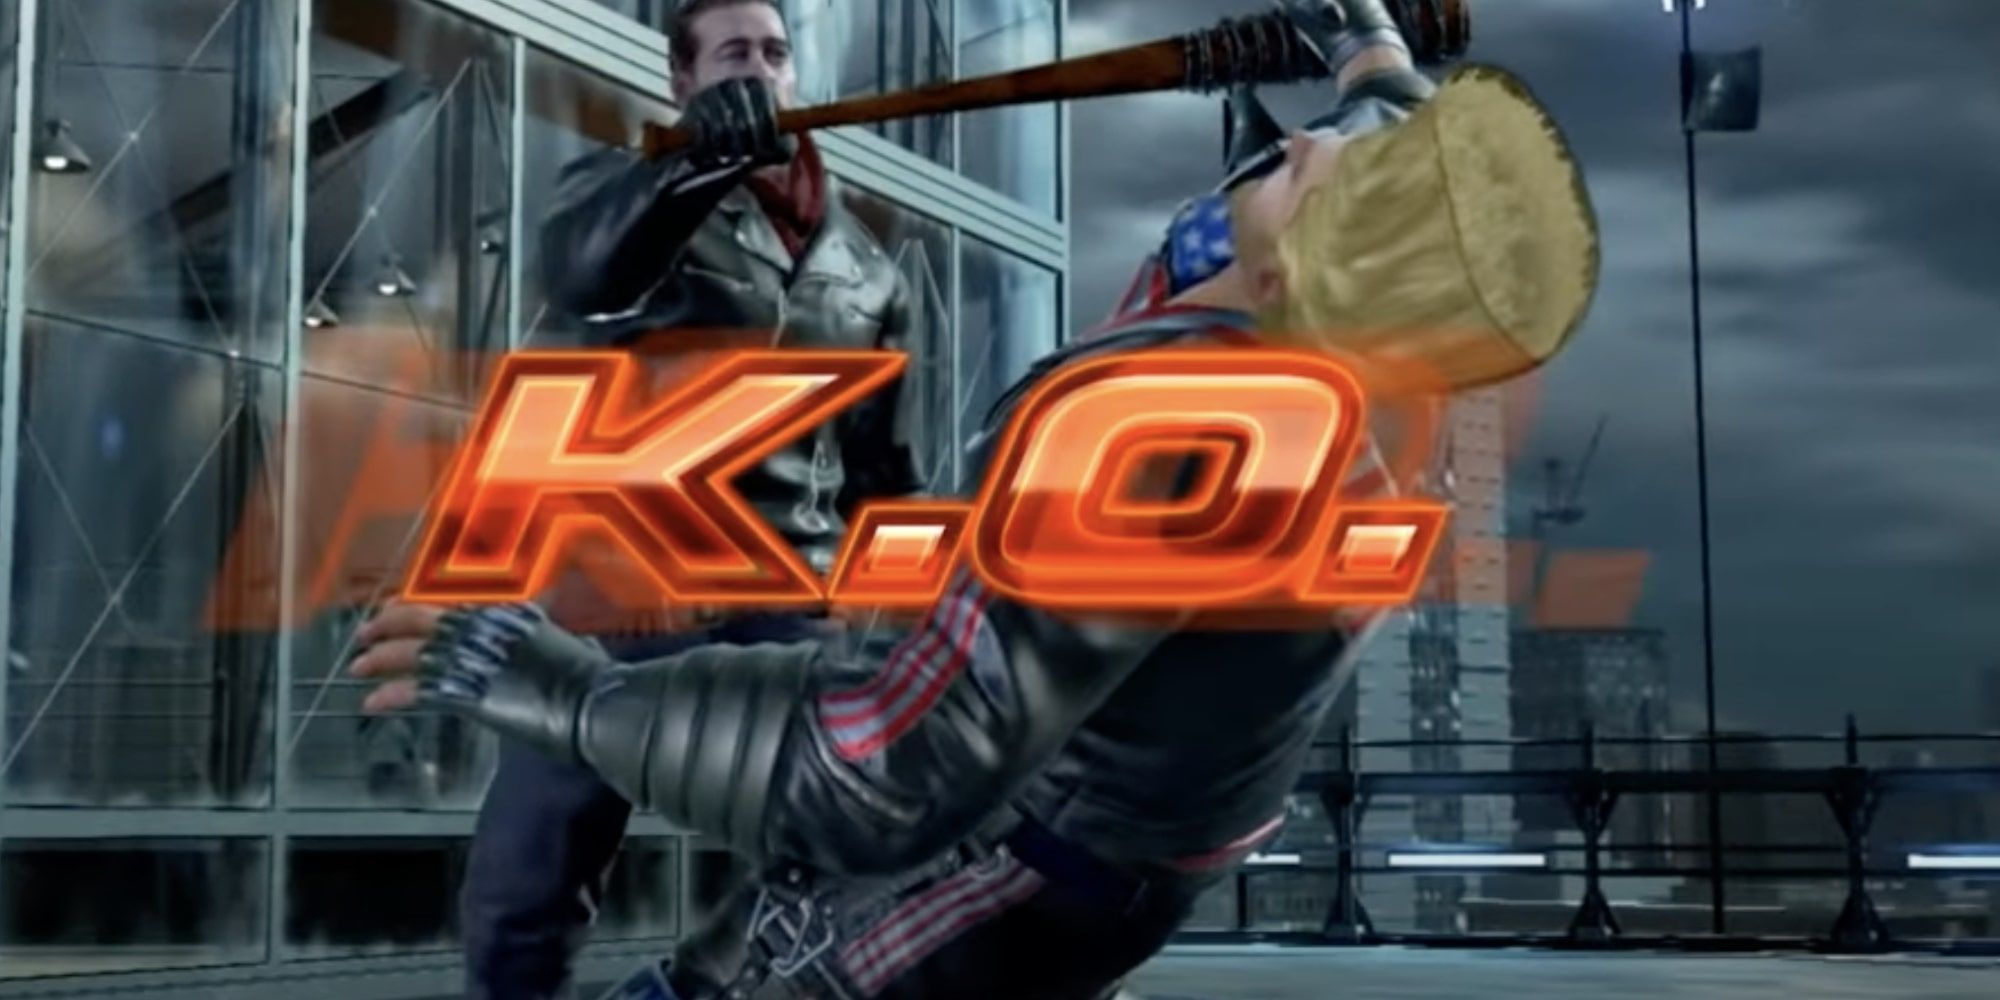 The Walking Dead's Negan knocks out Paul with a barb-wired baseball bat on a rooftop in Tekken 7.